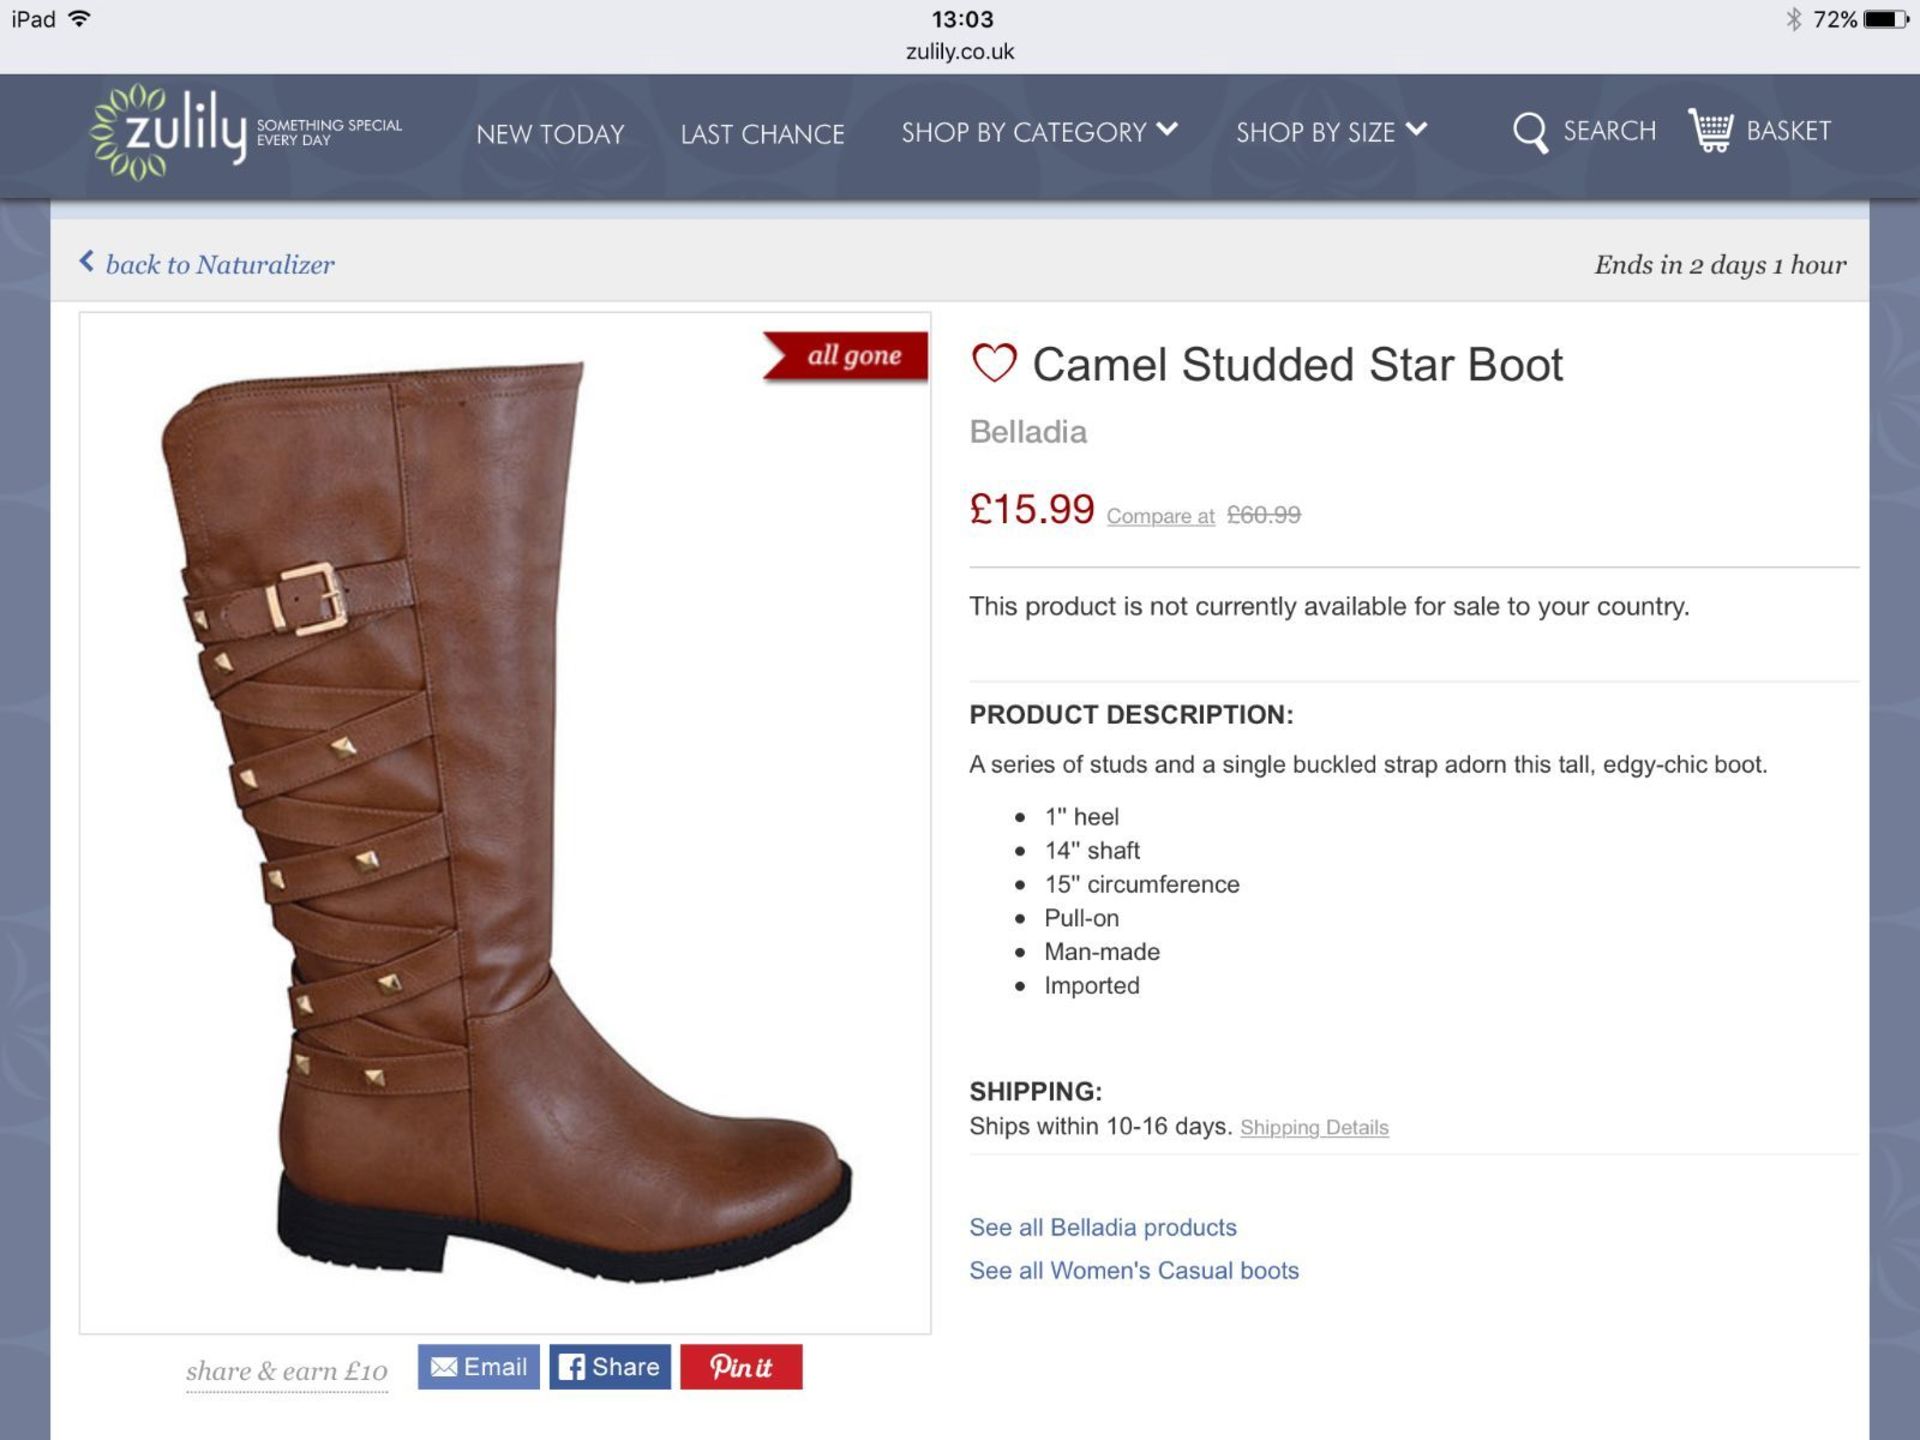 Belladia Camel Studded Star Boot, Size Eur 40.5, RRP £60.99 (New with box) [Ref: ] - Image 2 of 2